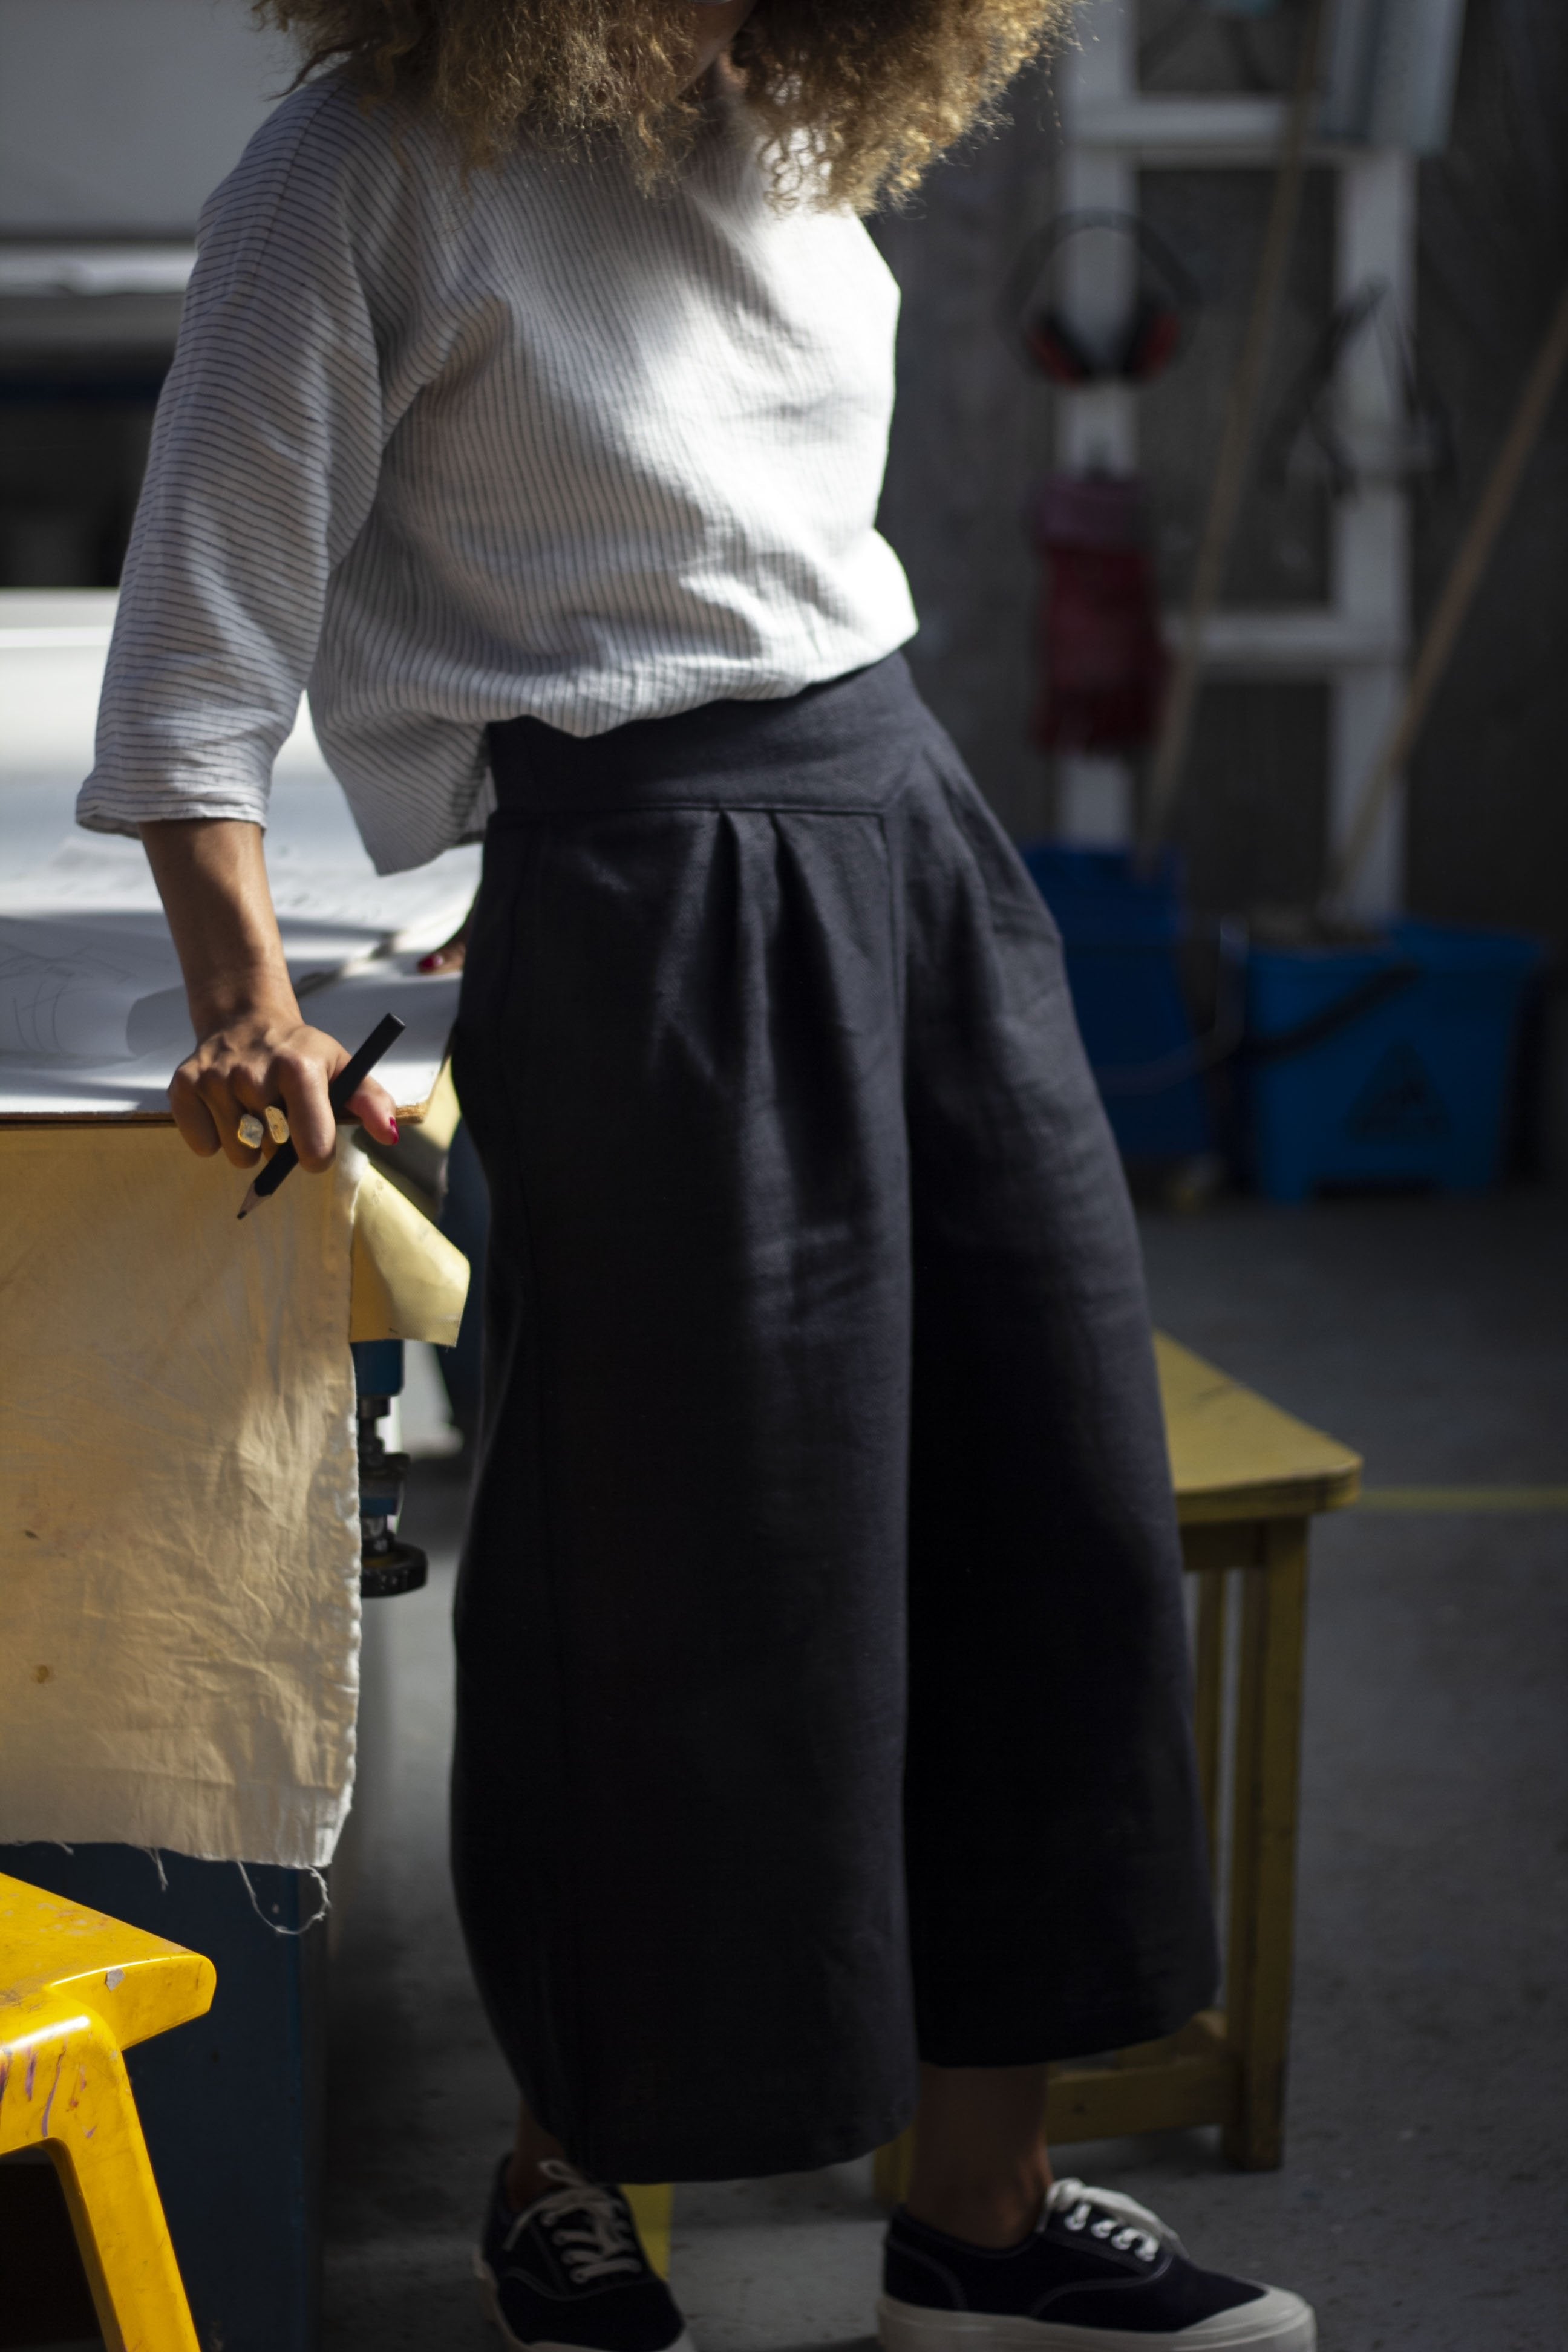 Custom-made, wide trousers made from 100% linen